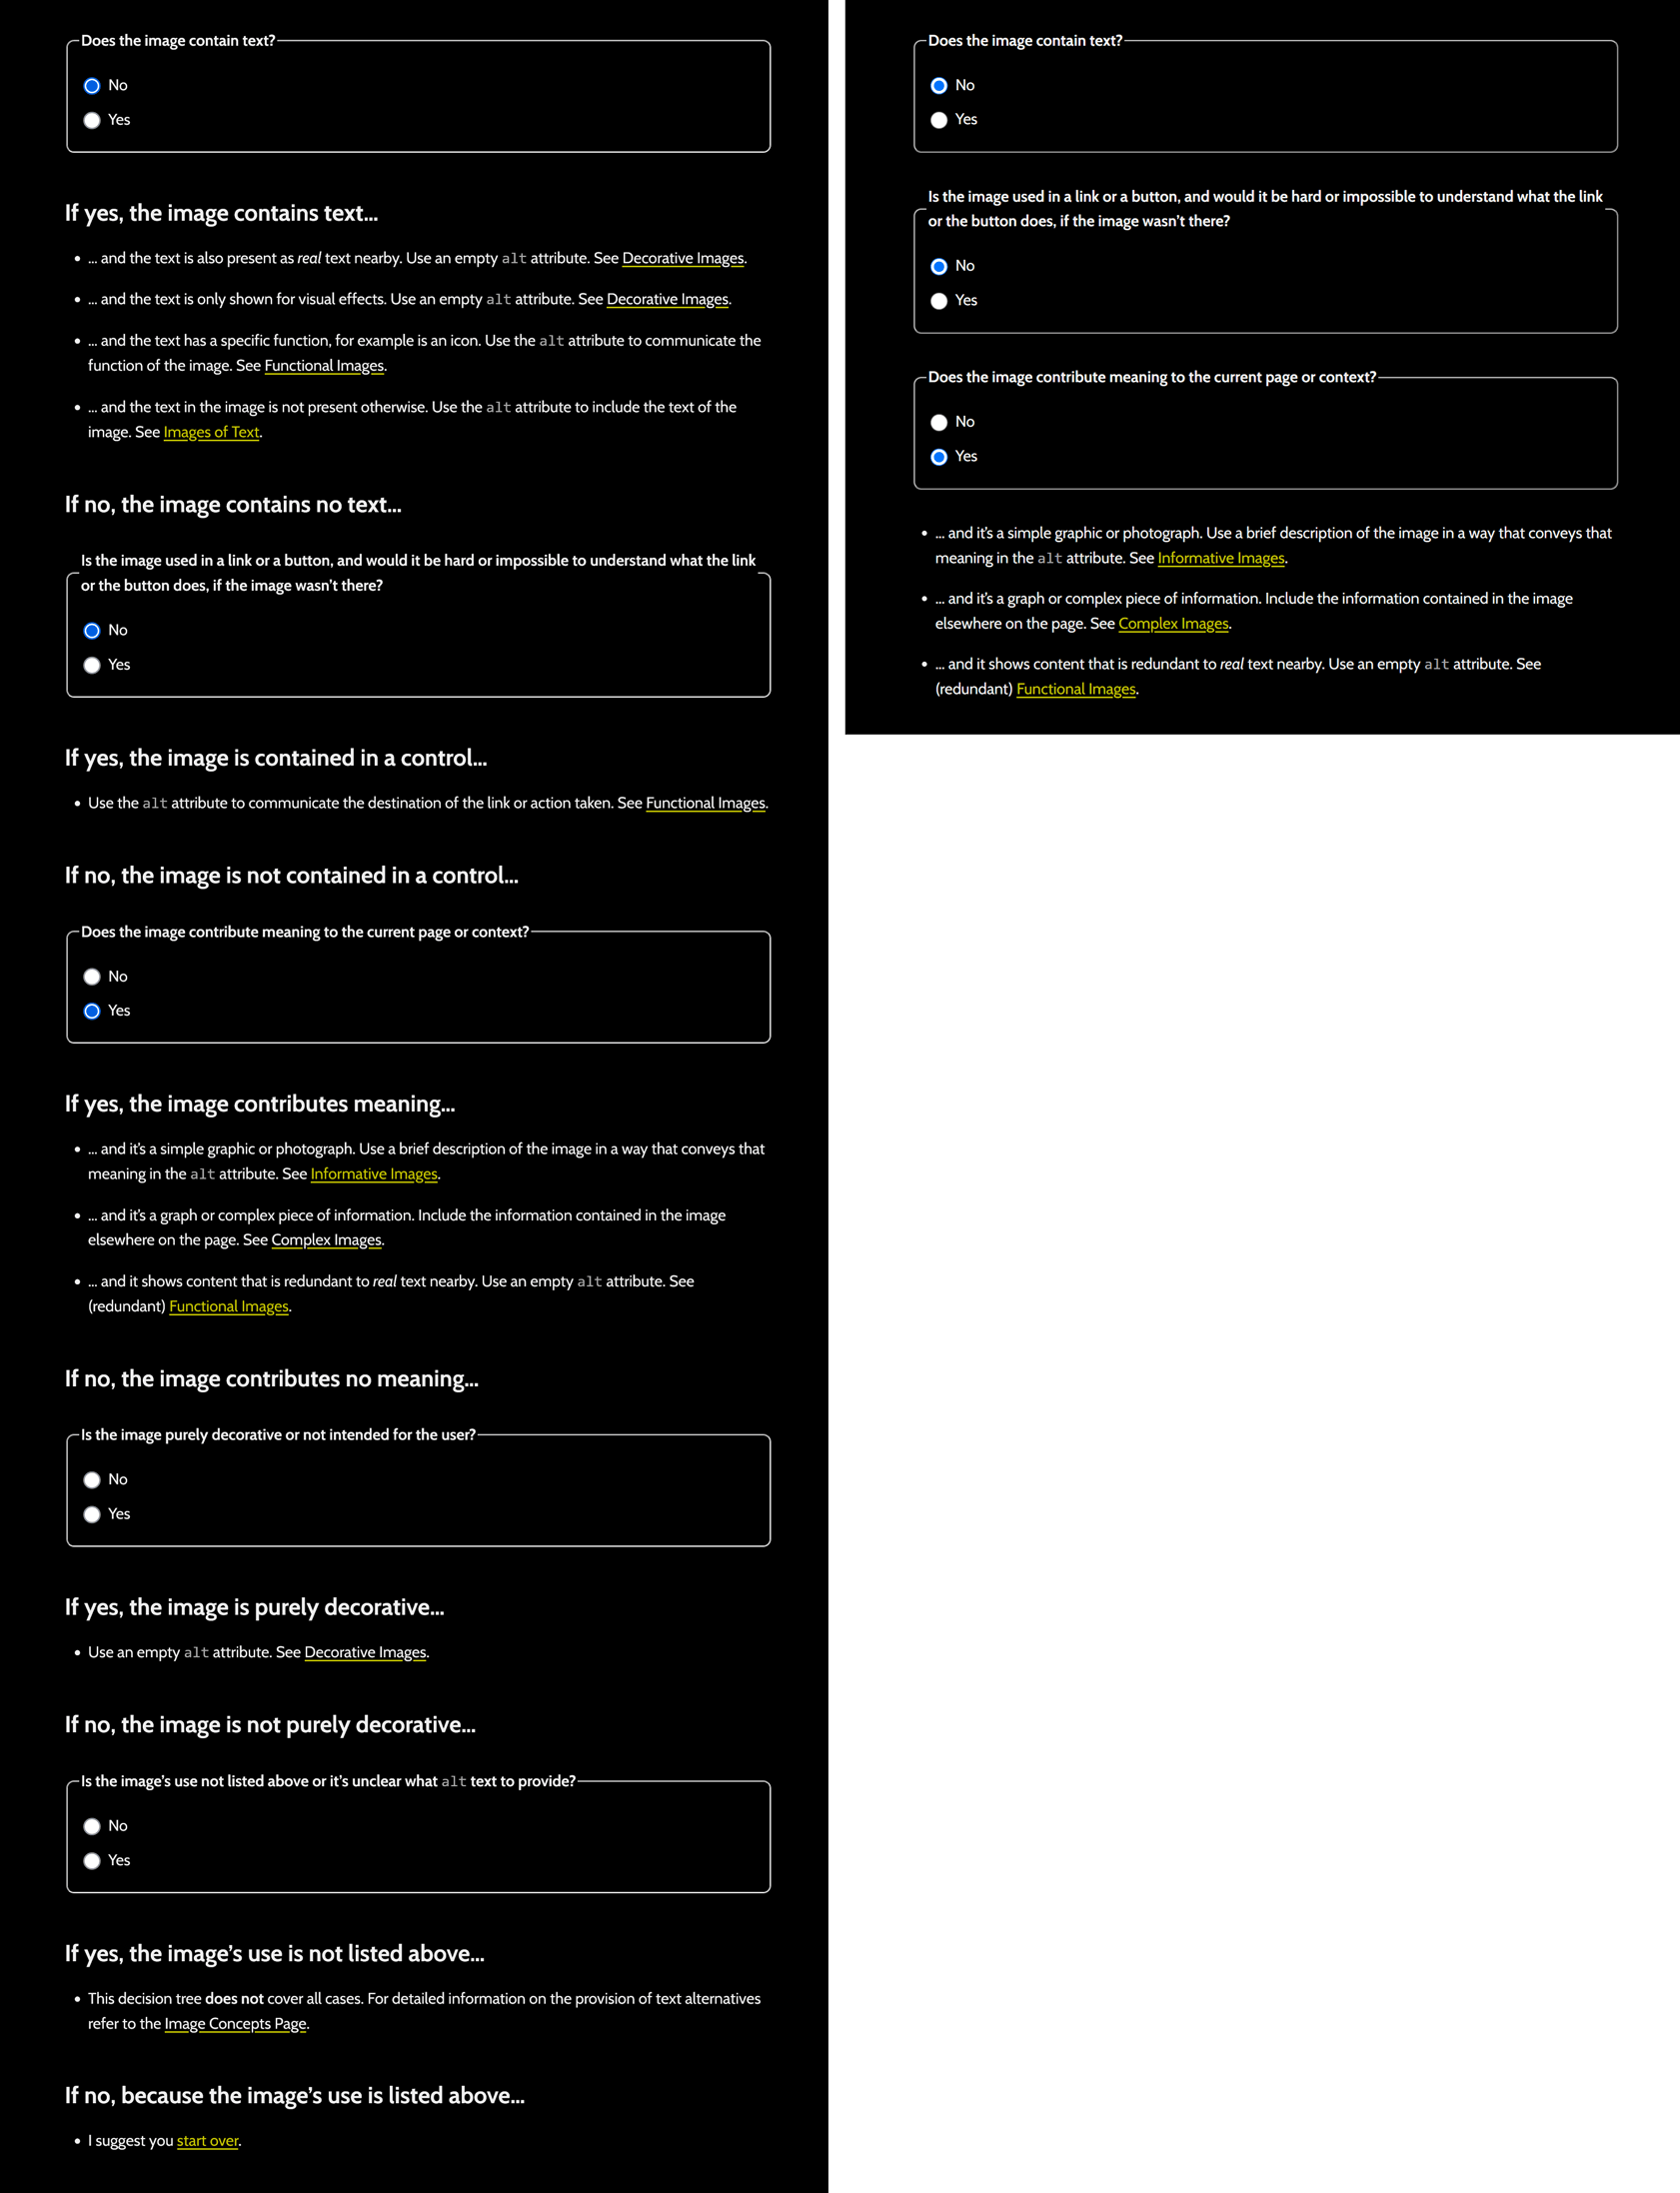 Side-by-side comparison of two web pages; the first shows all the possible content even with three questions answered while the second shows content that answers the third question alone, resulting in a much shorter page.